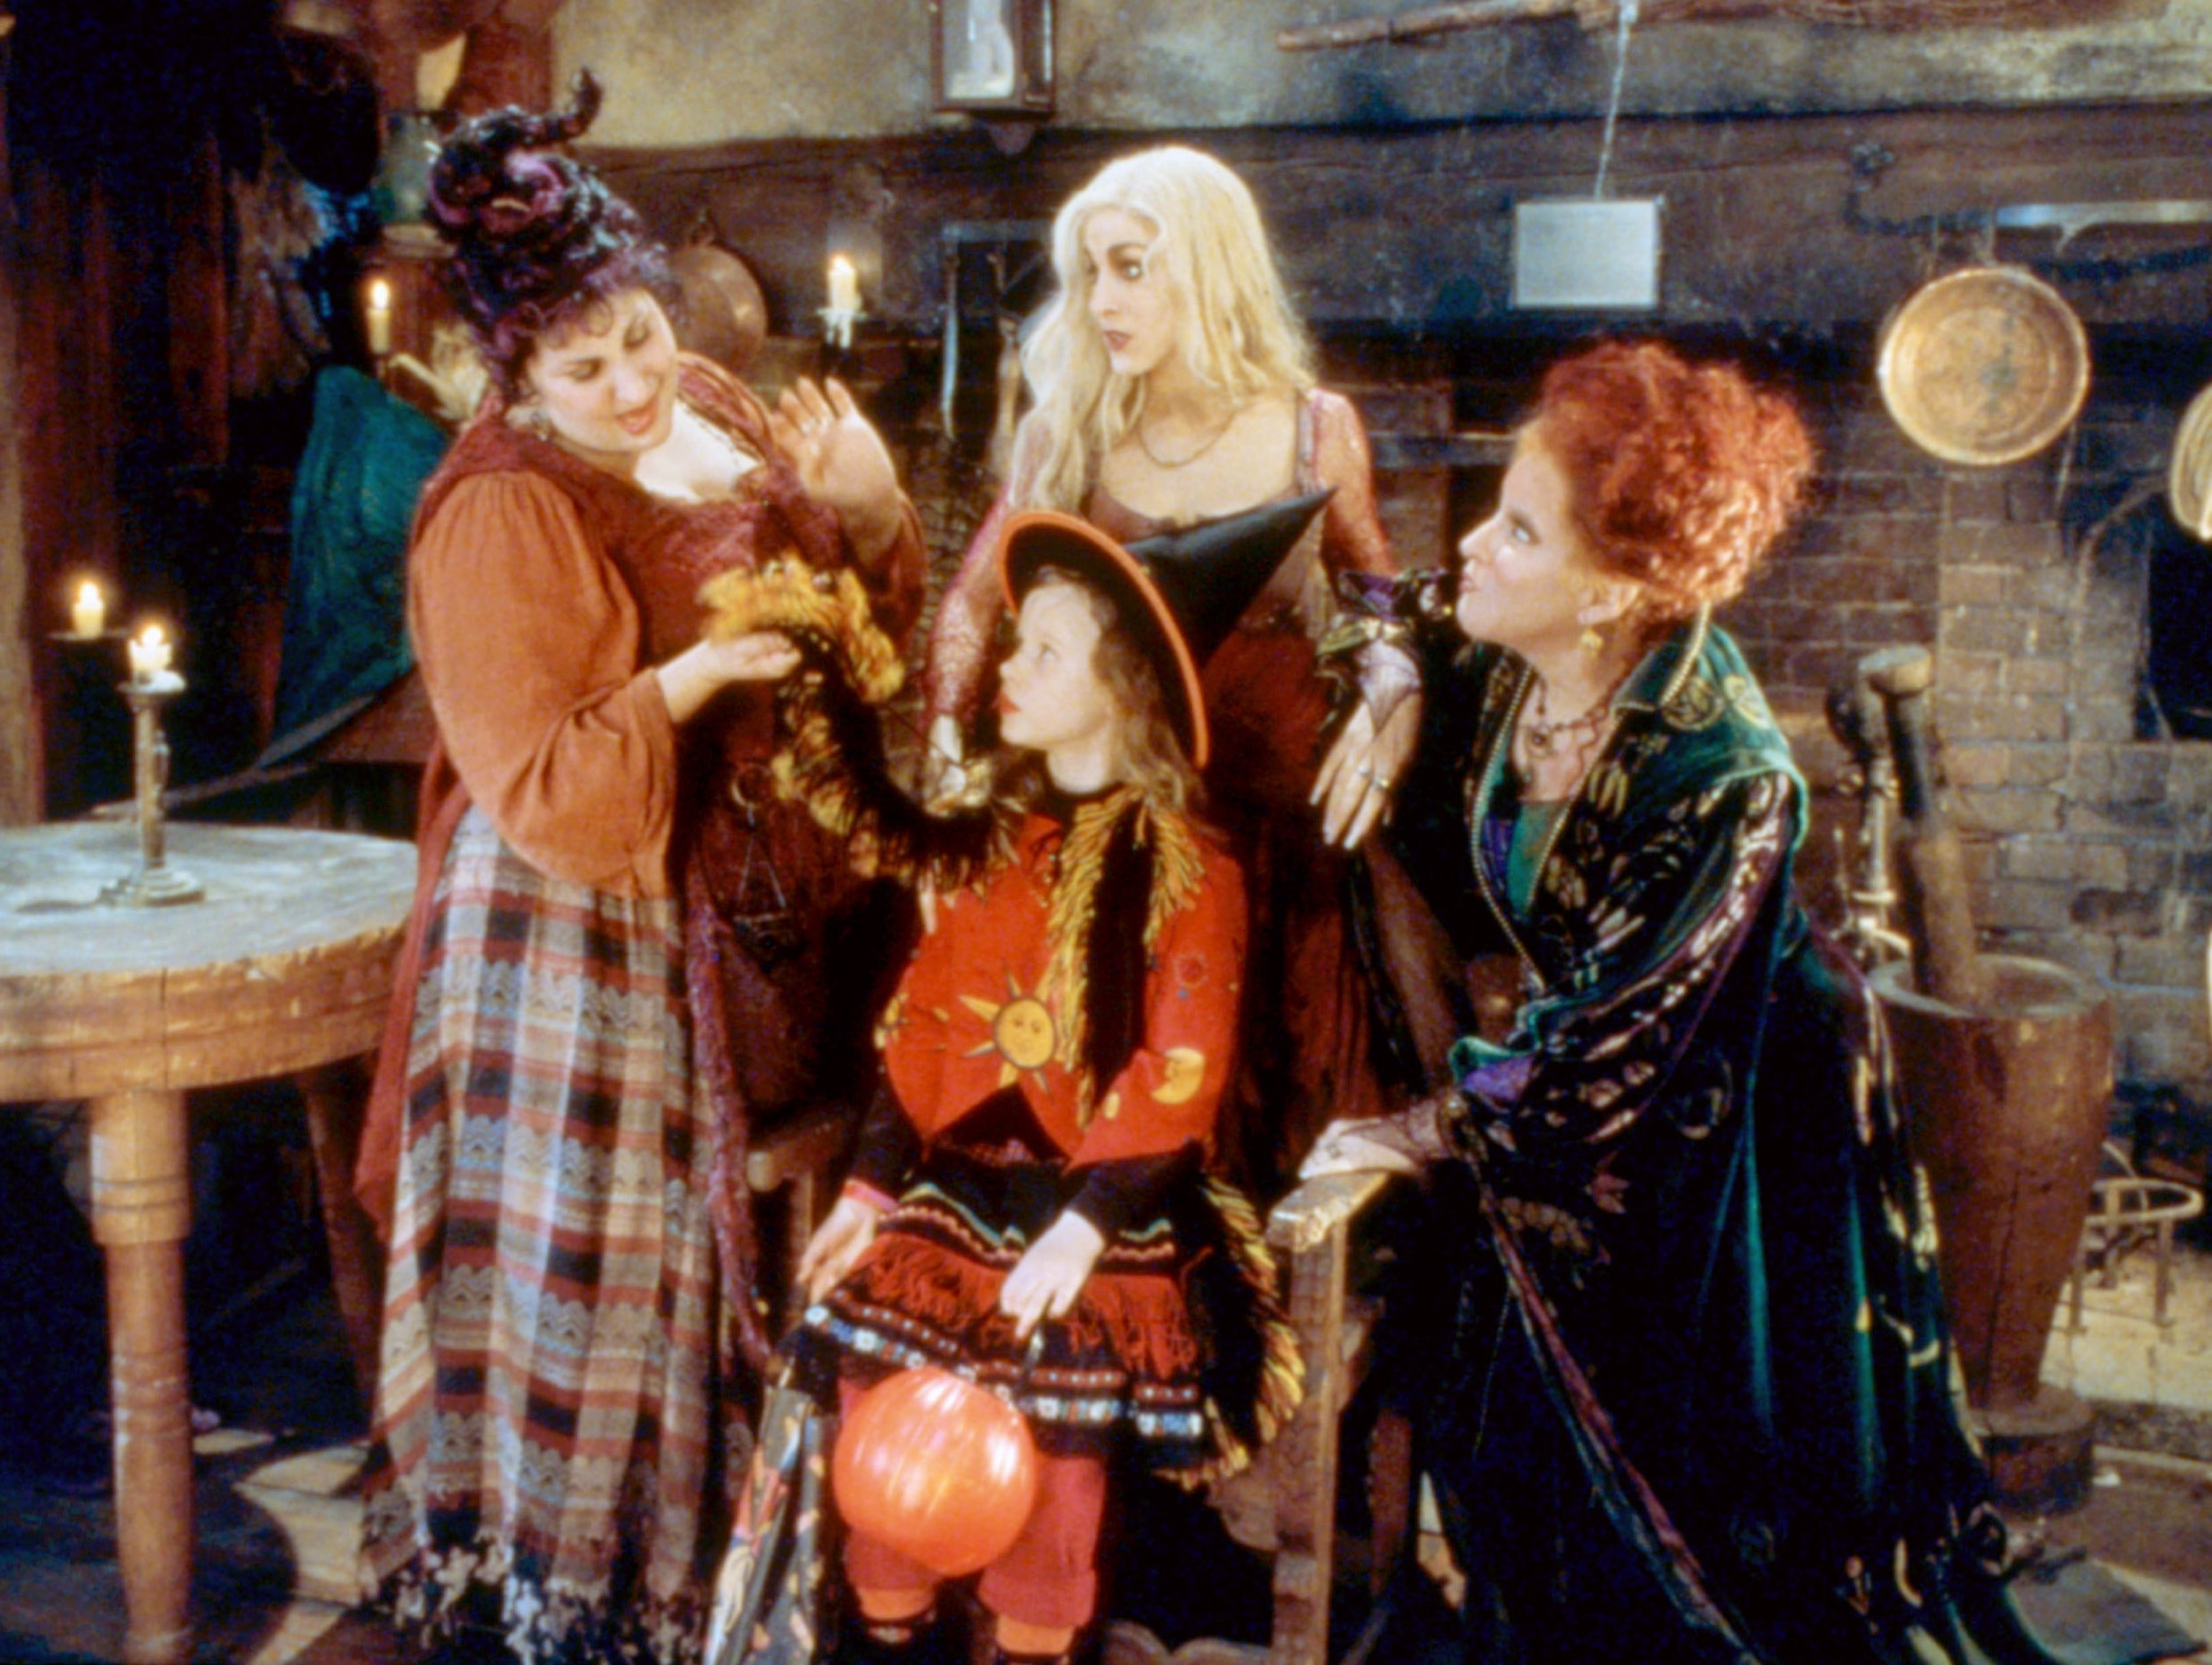 the Sanderson Sisters with Dani